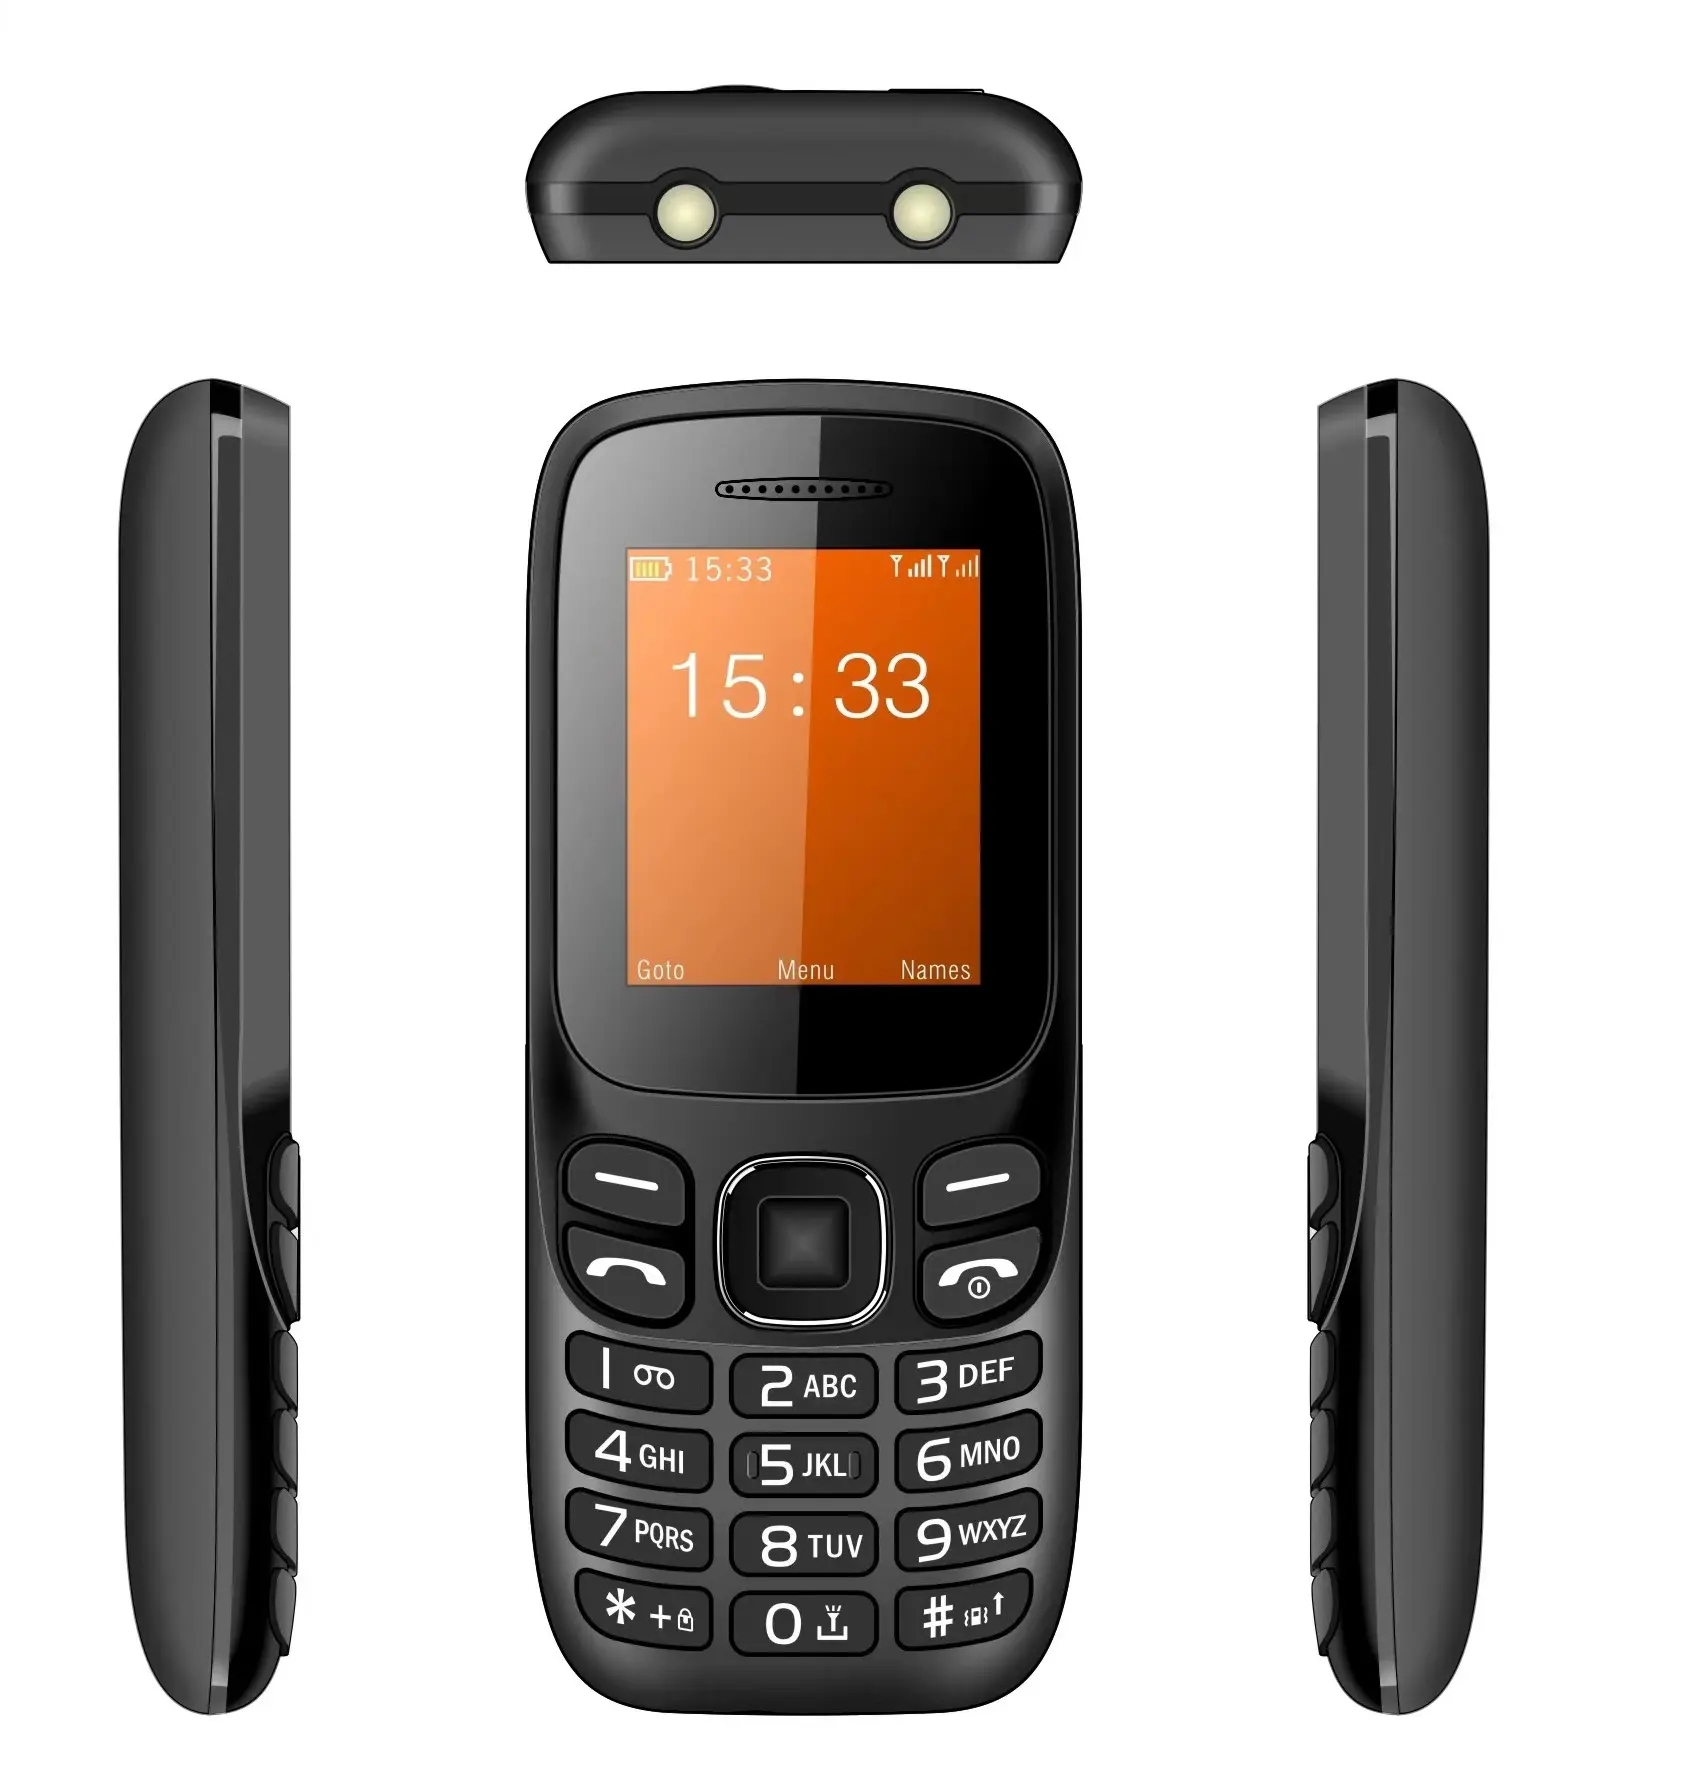 WD2171 dual sim 3G mobile phone 1.77 inch small basic mobile phone GSM telephone cell phone unlocked